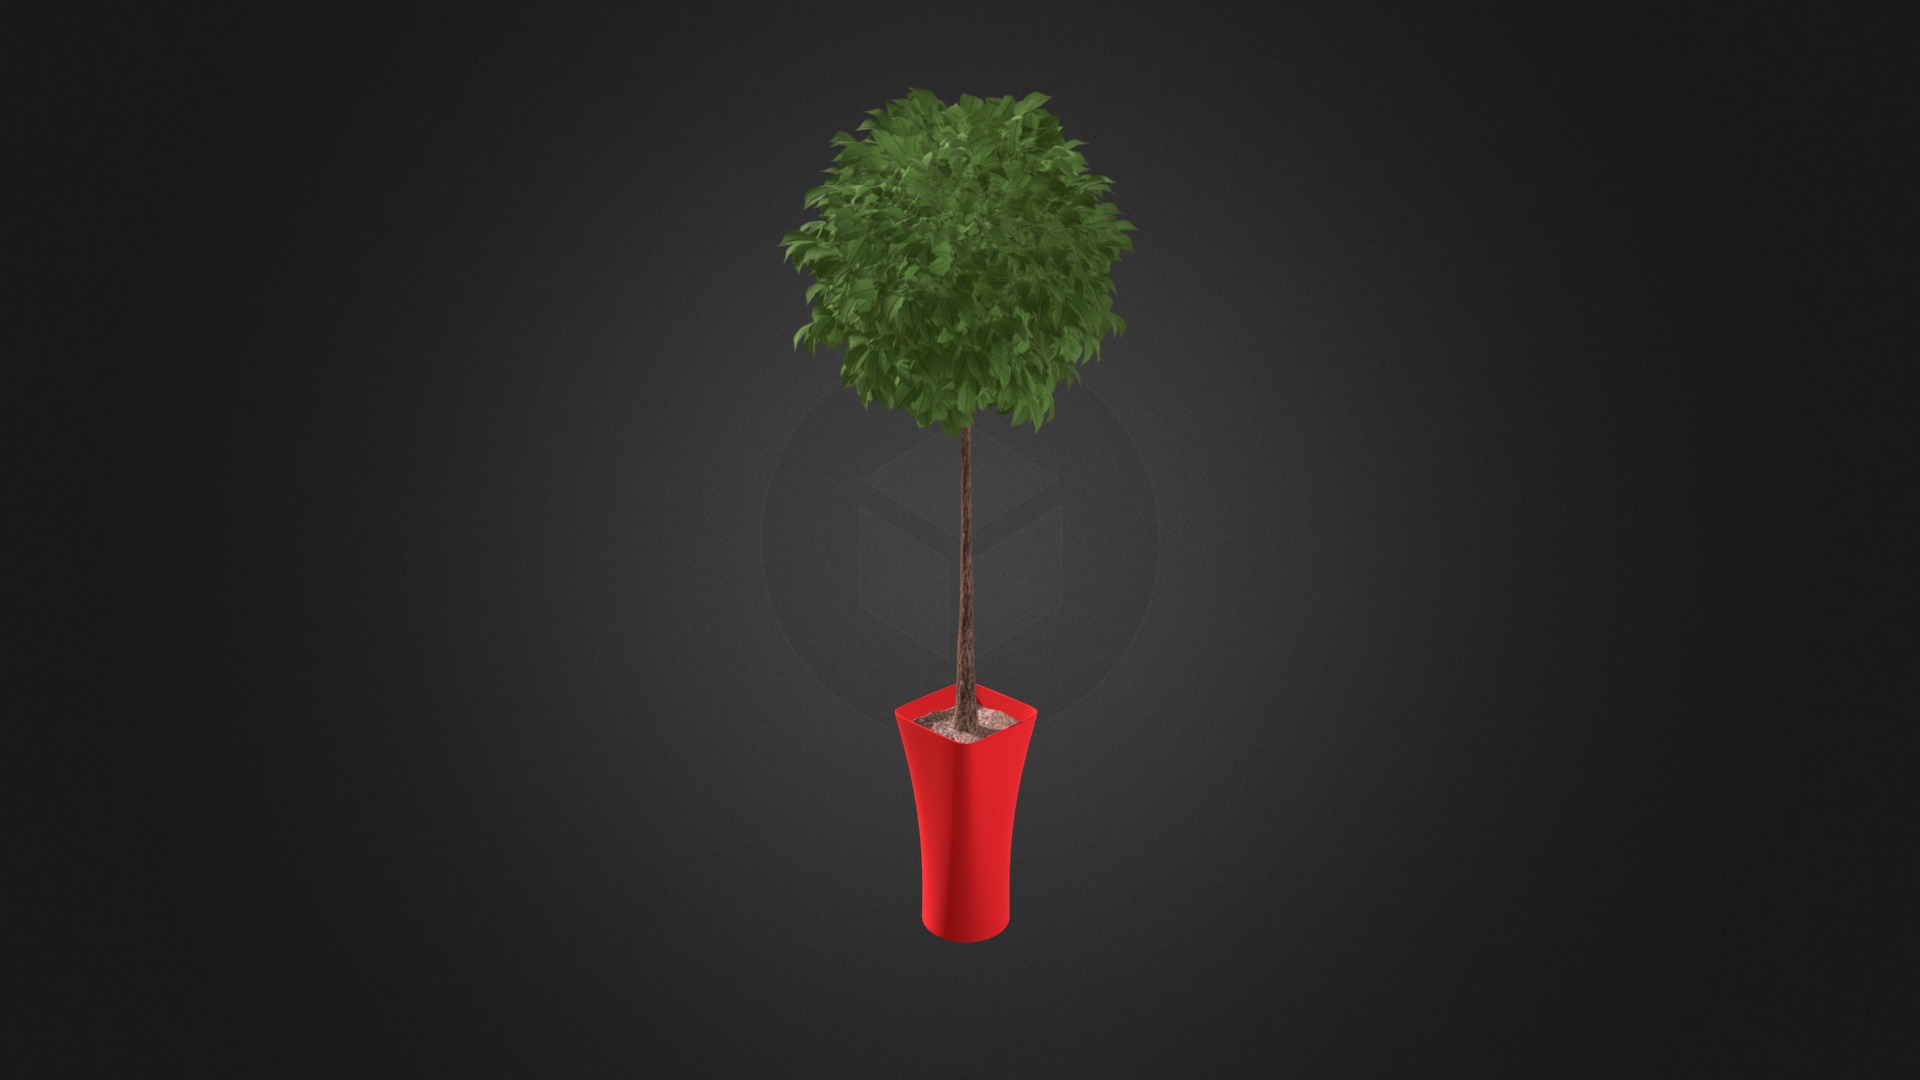 3D model Potted Tree - This is a 3D model of the Potted Tree. The 3D model is about a red lamp with a green leaf on top.